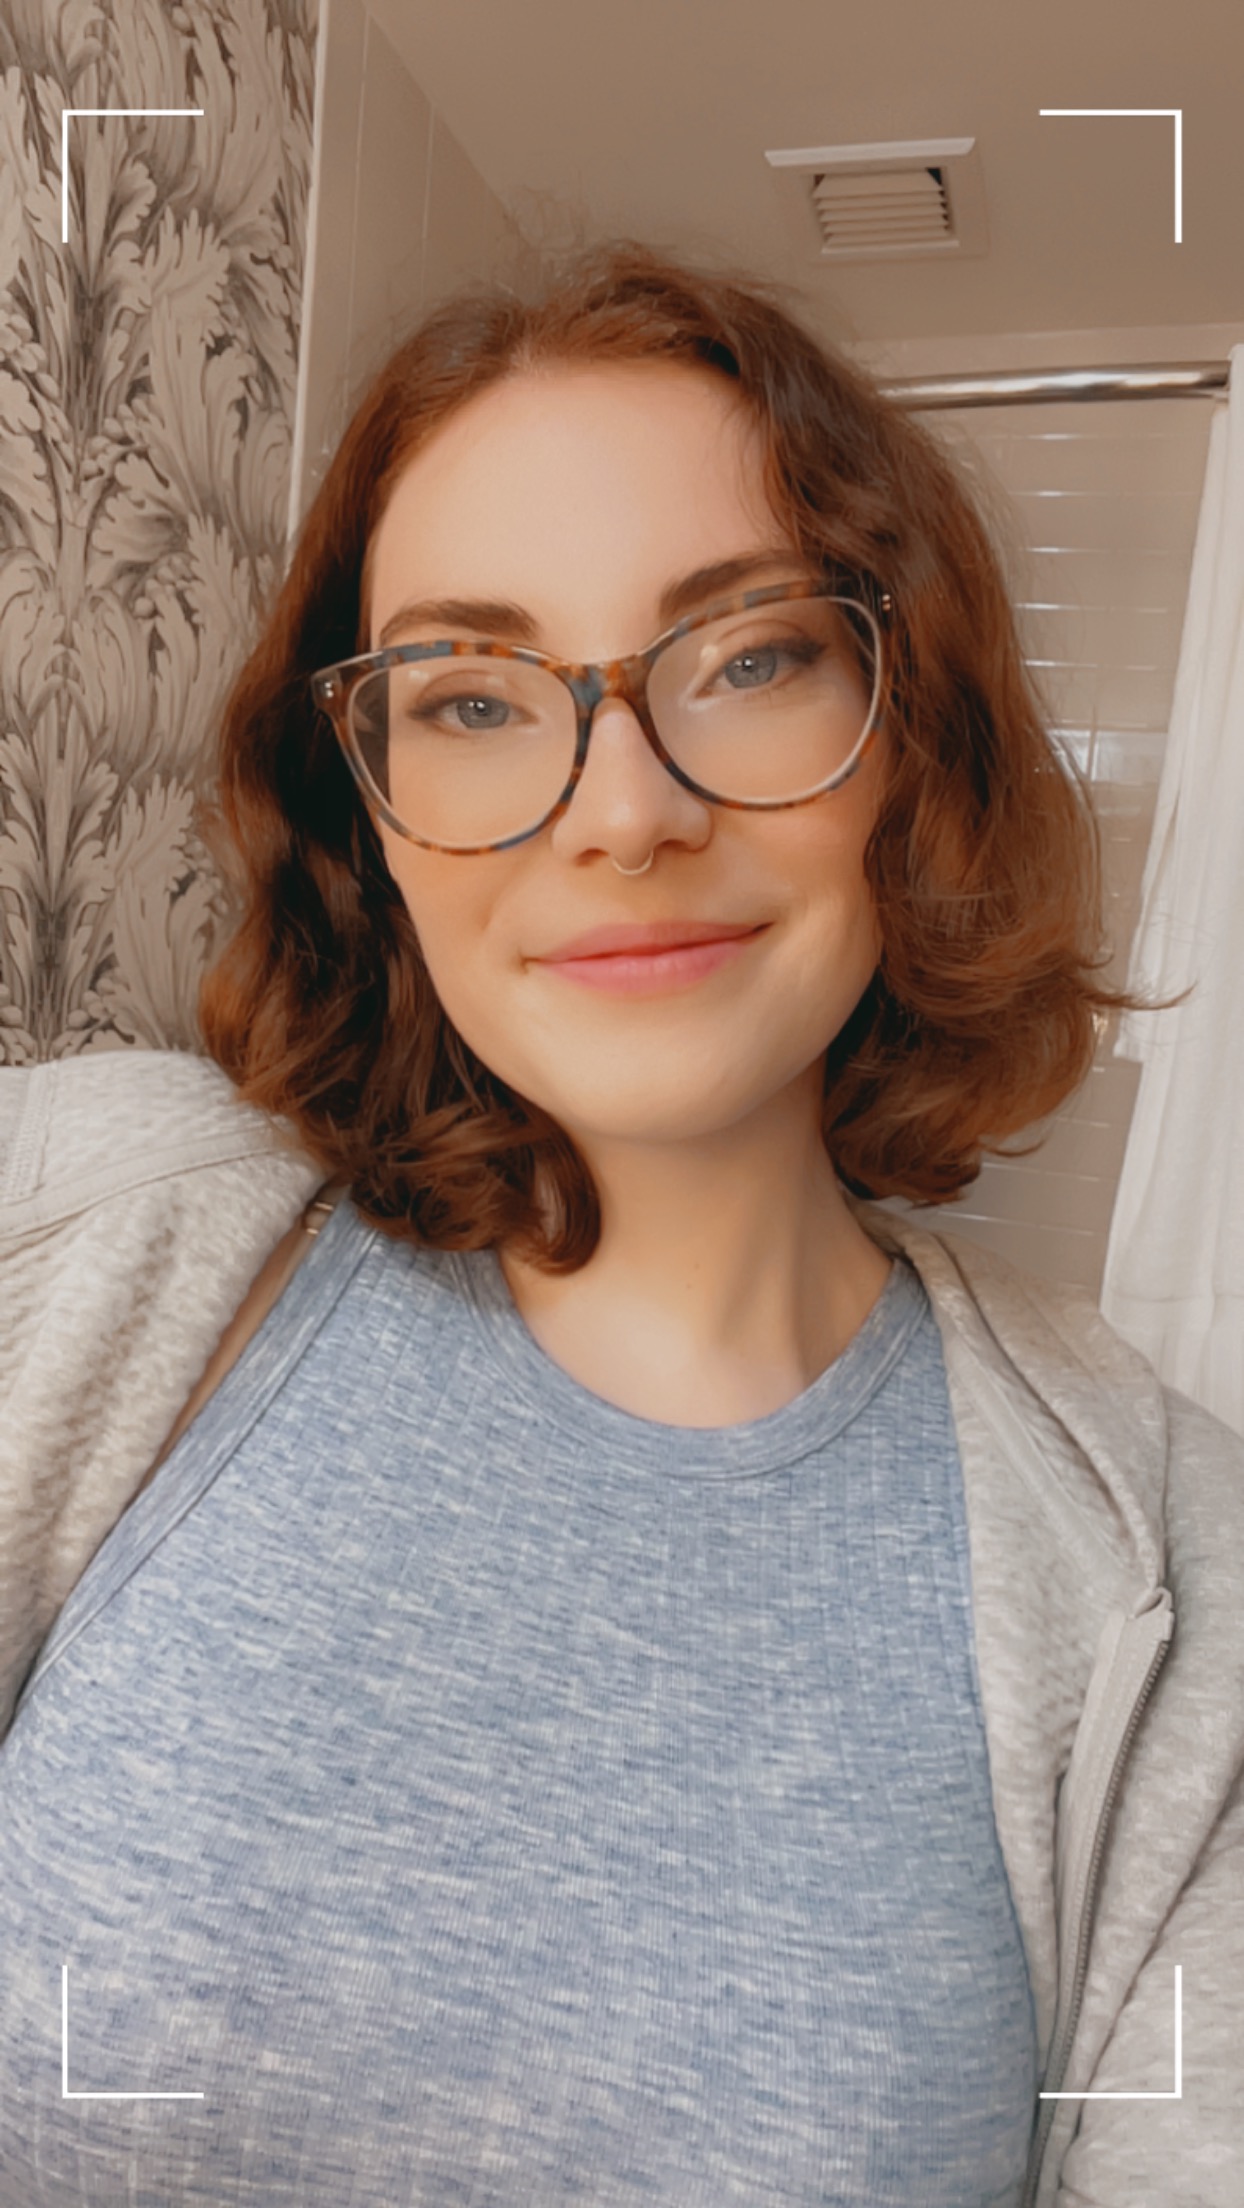 Woman in a gray shirt with glasses